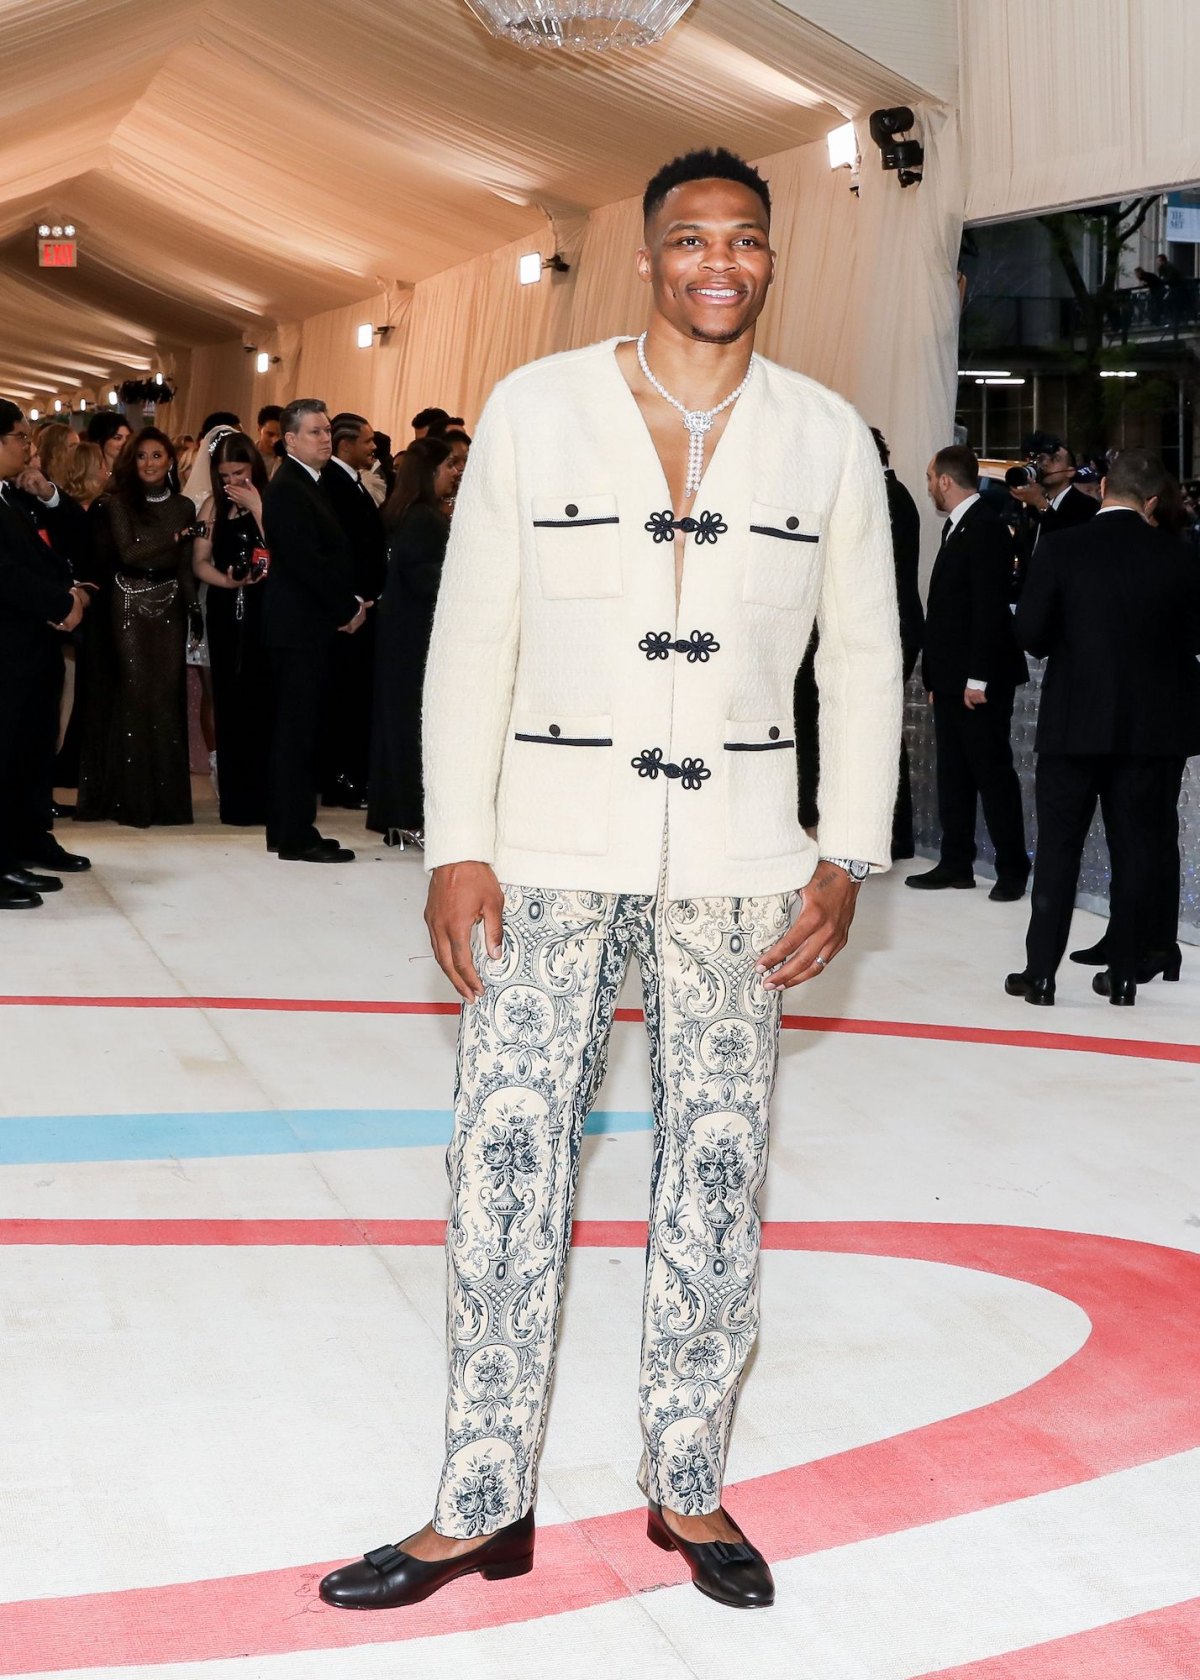 Ralph Lauren and Louis Vuitton Court Consumers With MLB, NBA